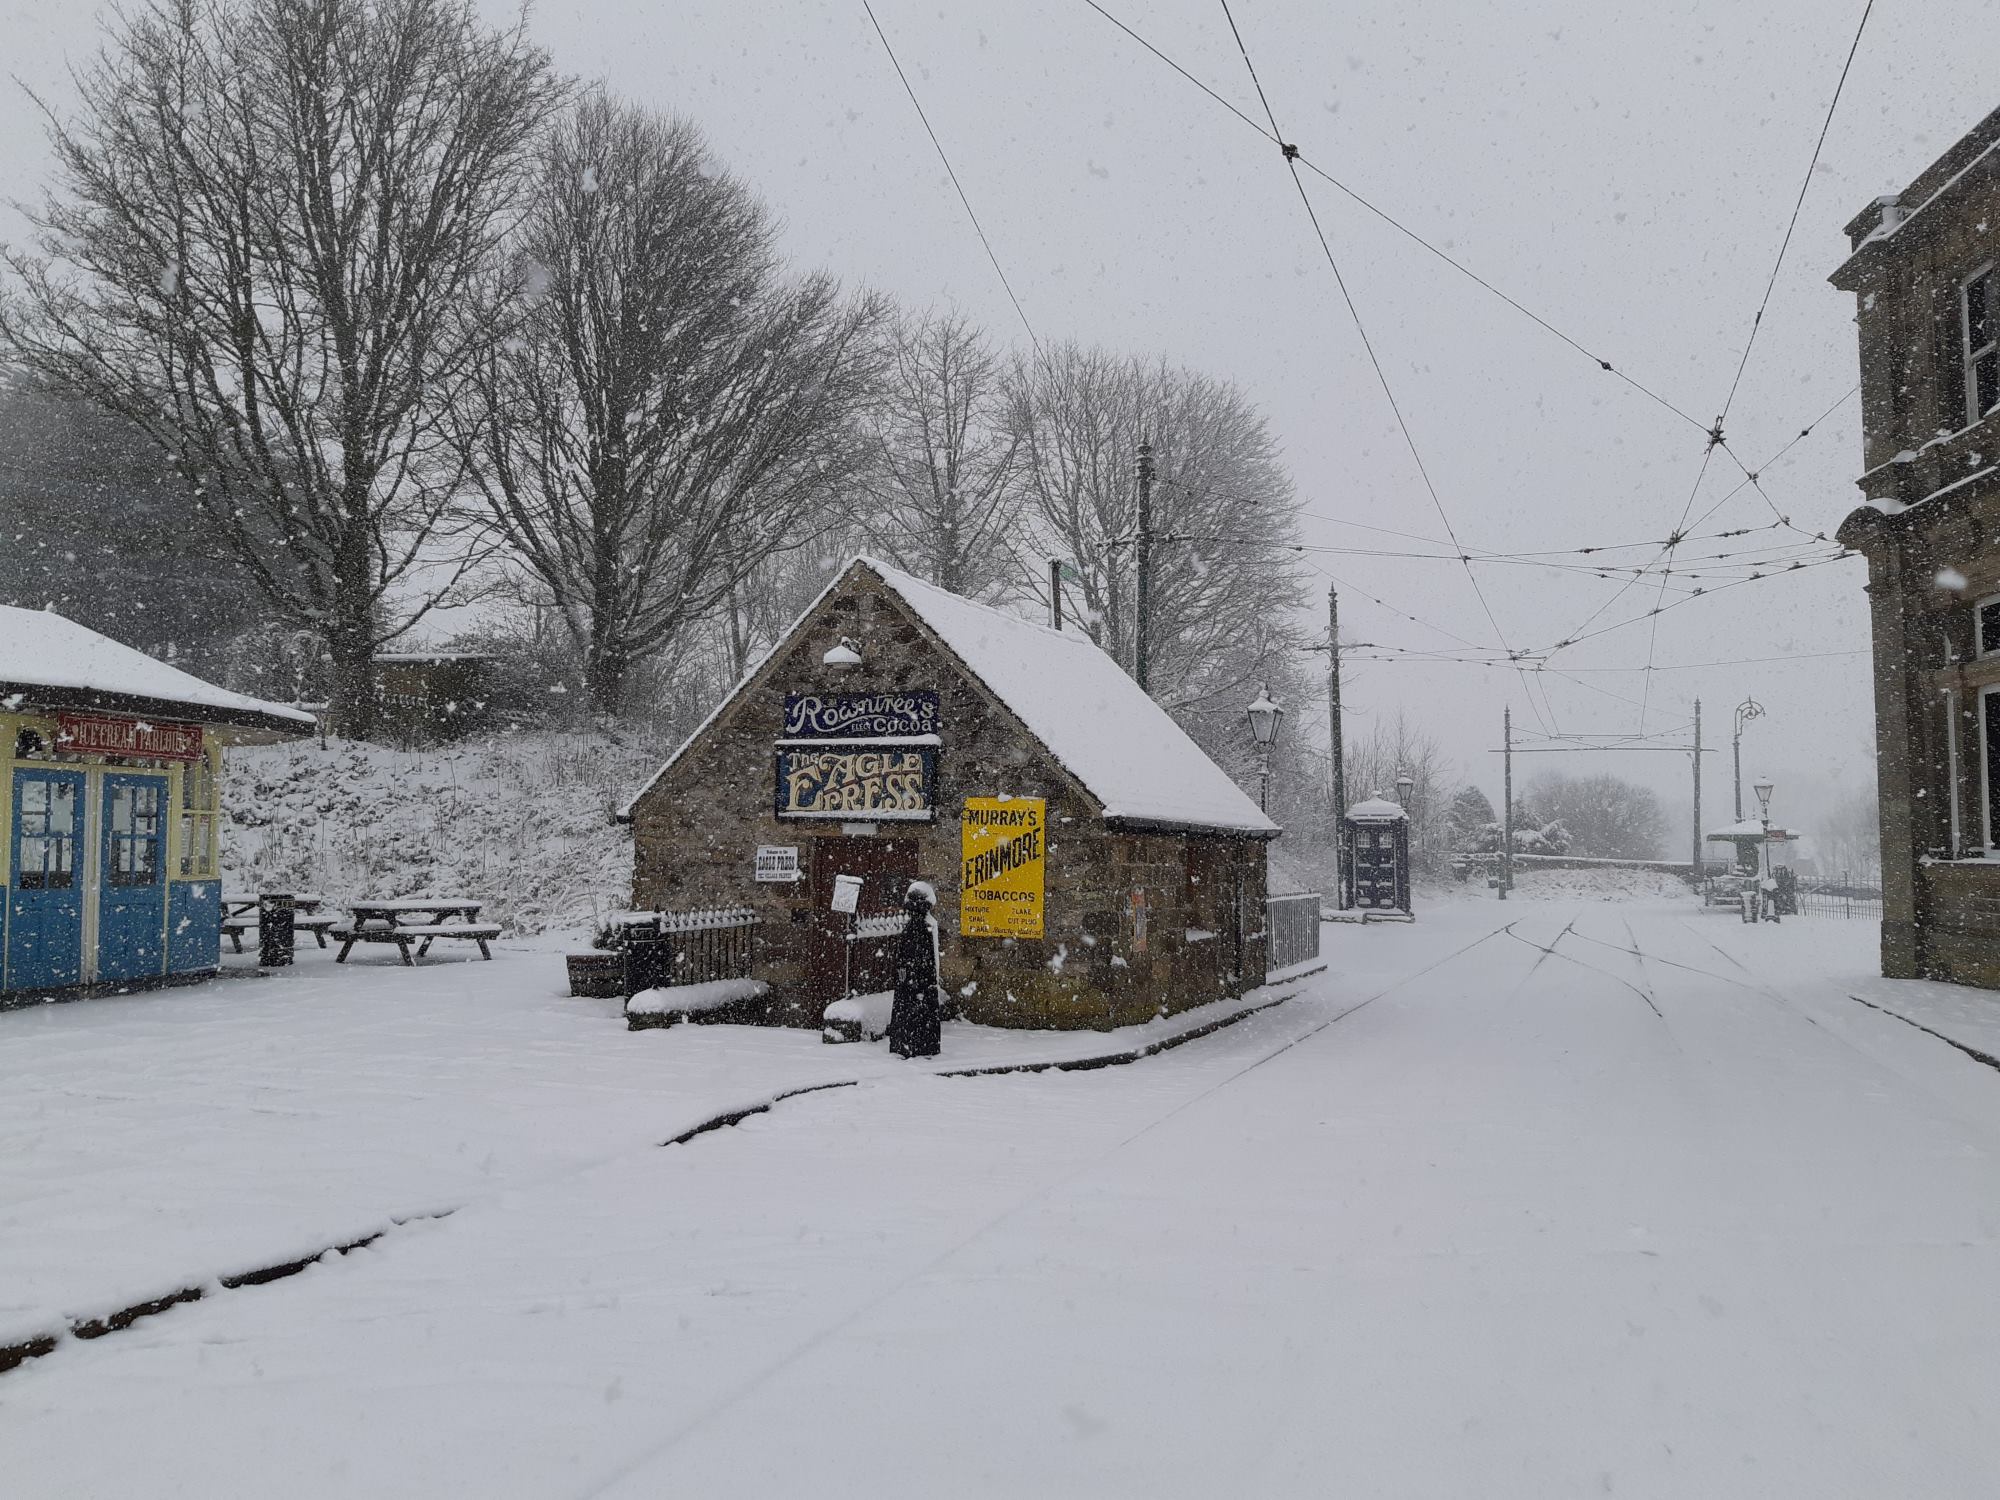 Crich Tramway Village in the snow